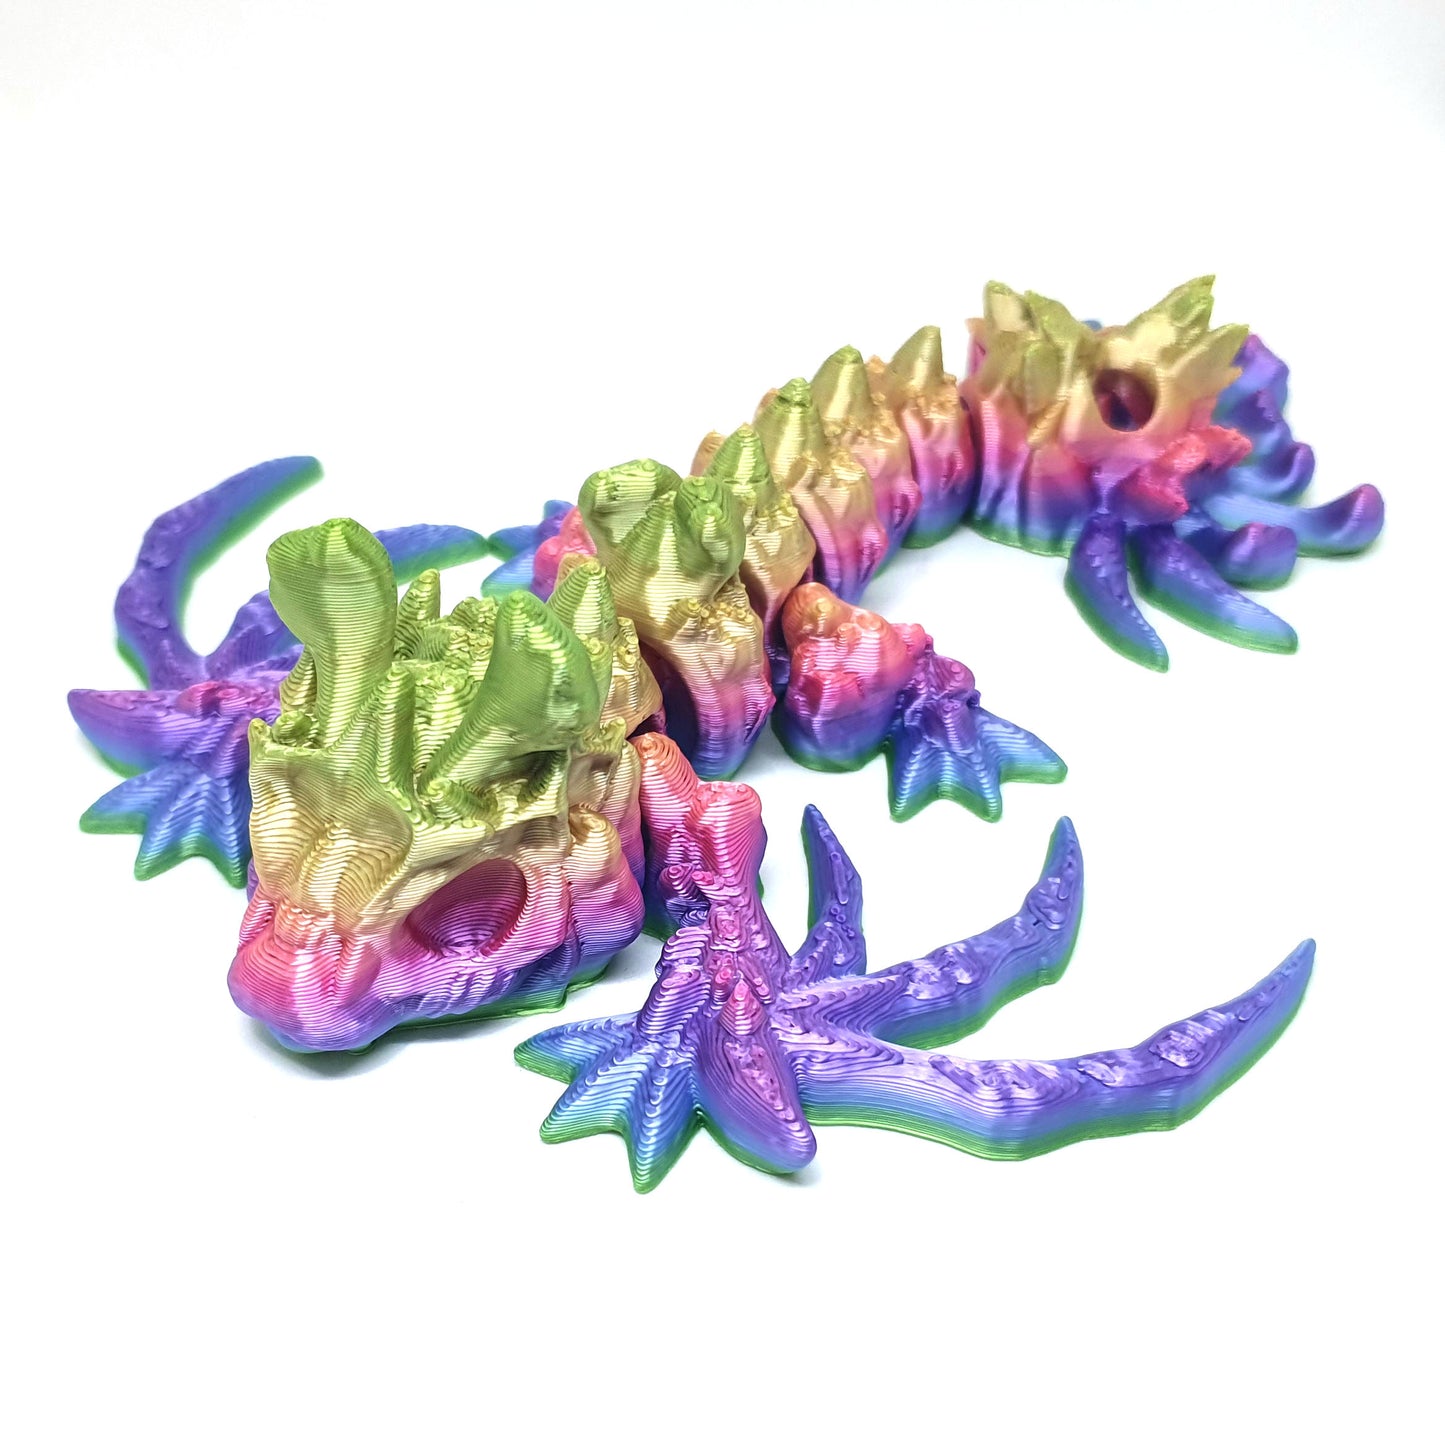 Hollow Wyvern Articulated Baby Dragon